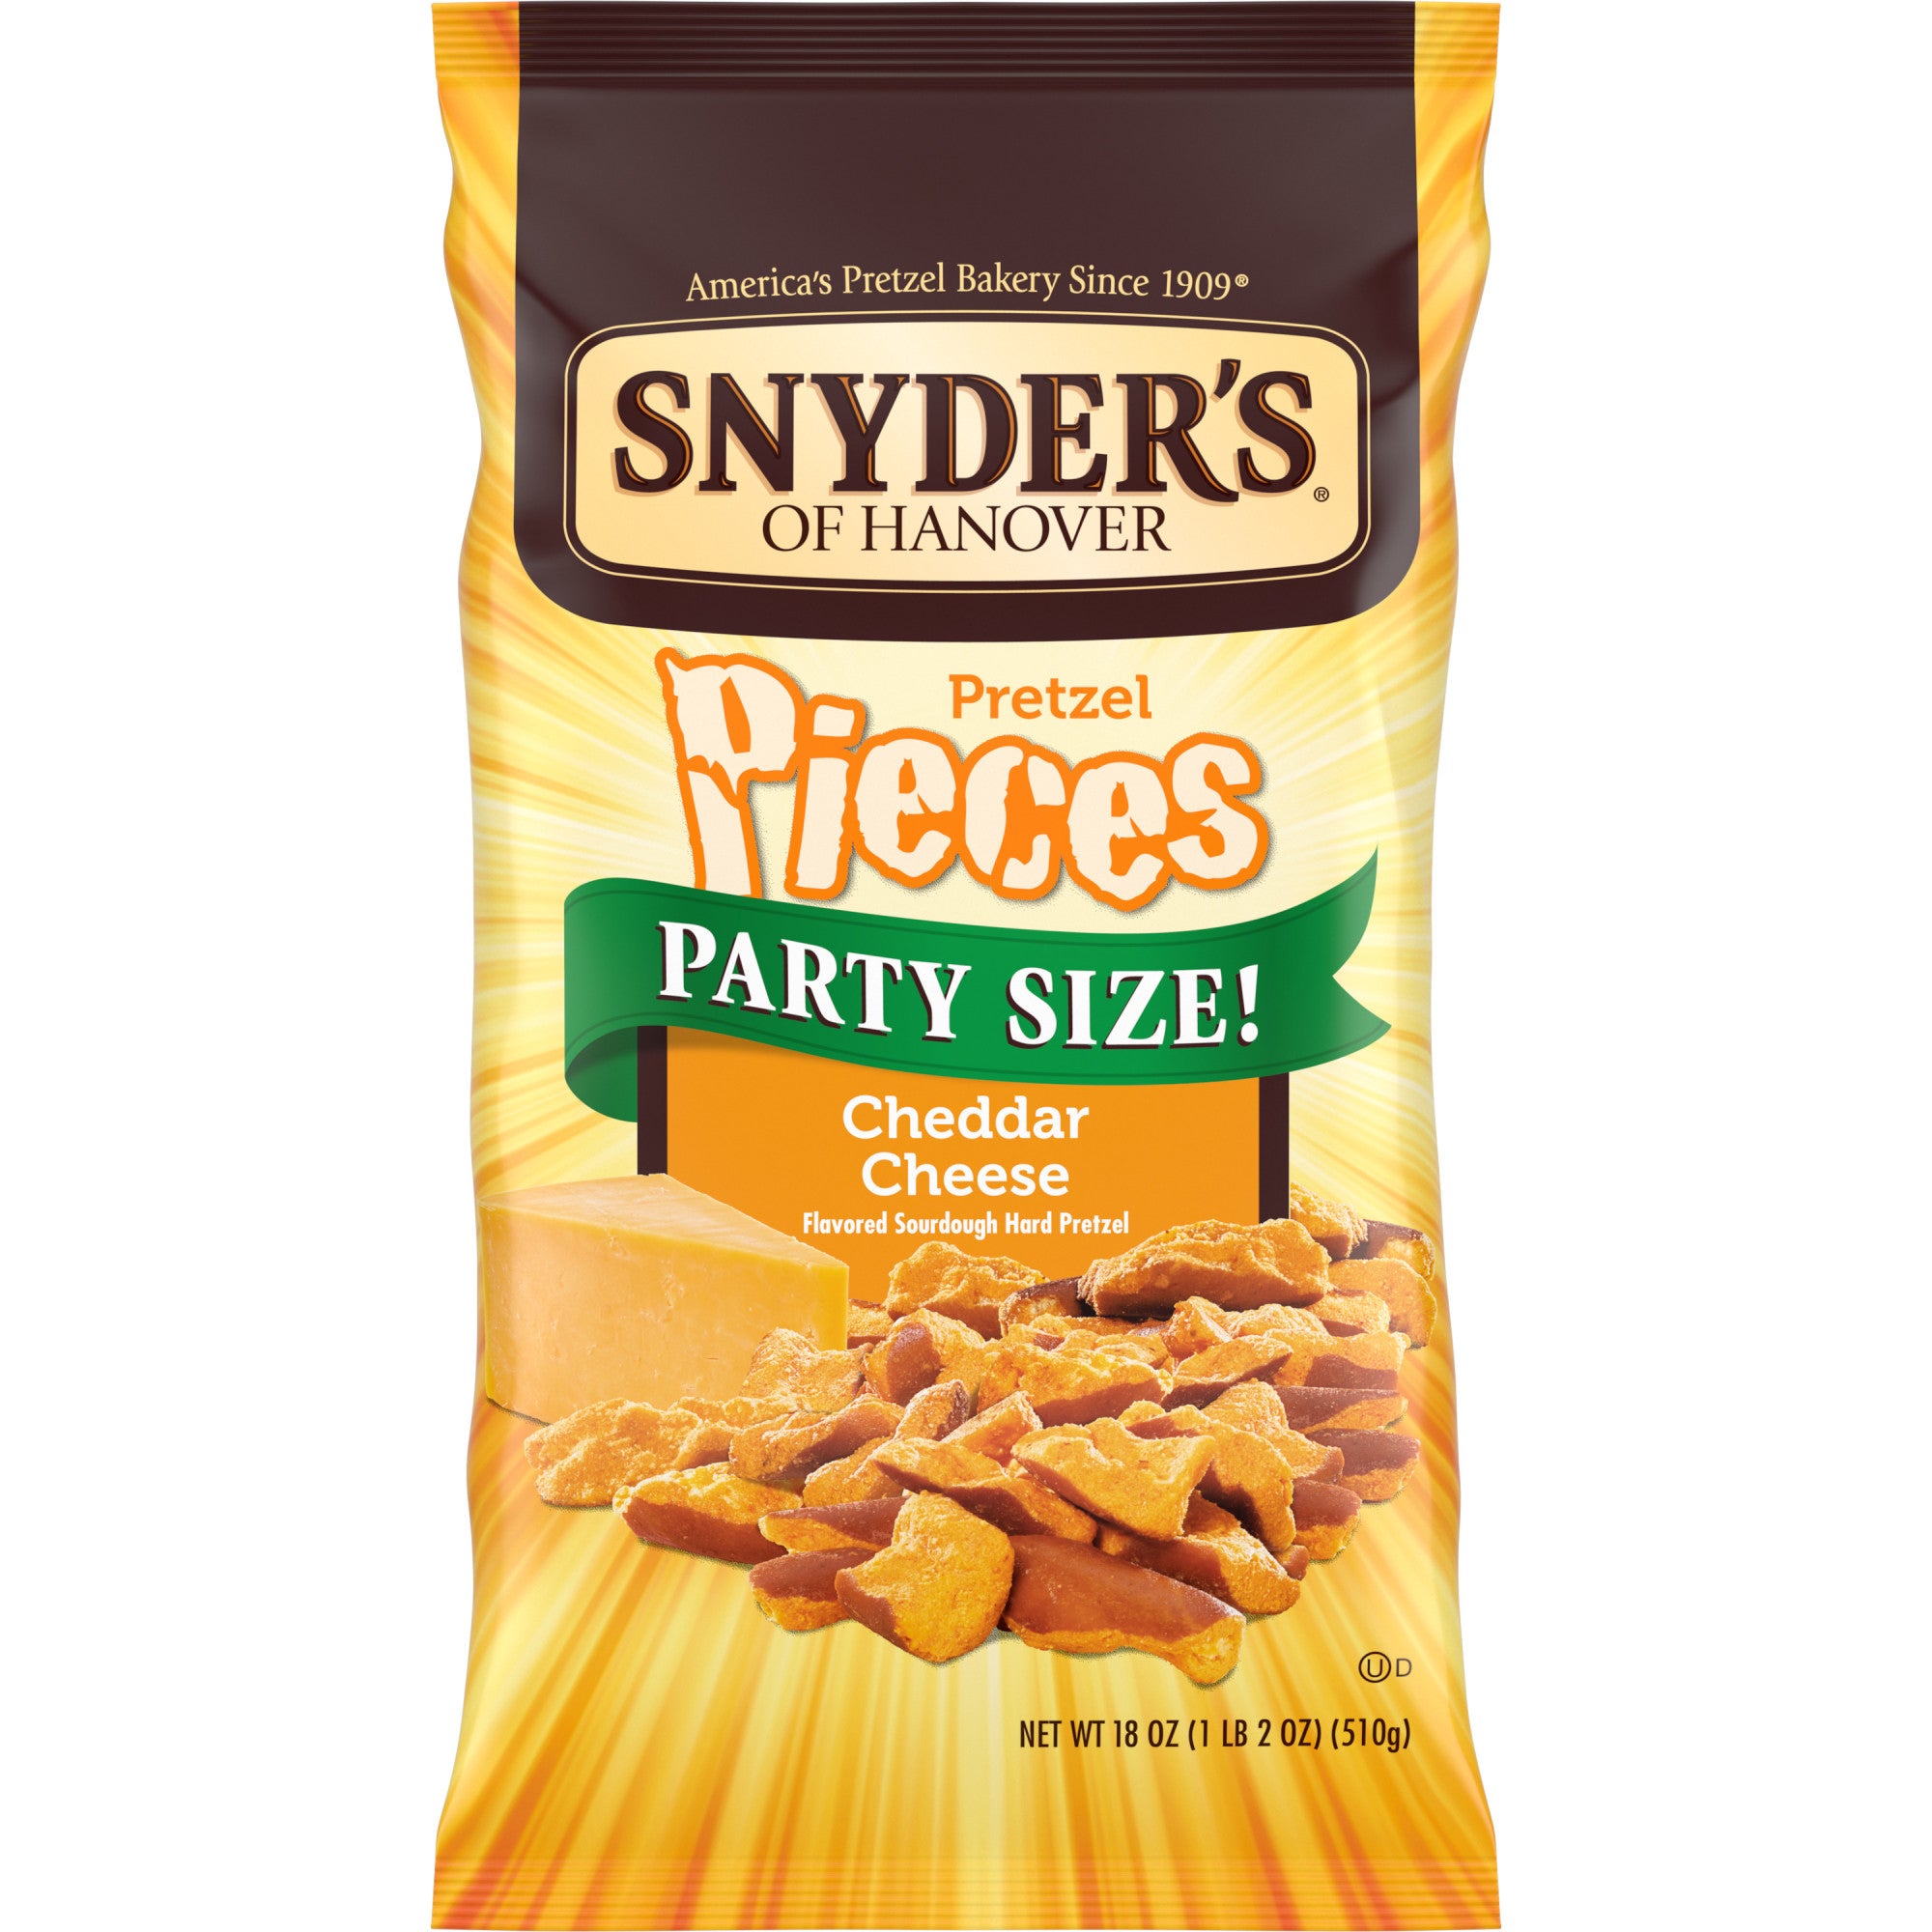 Snyder's of Hanover Pretzel Pieces, Cheddar Cheese, Party Size